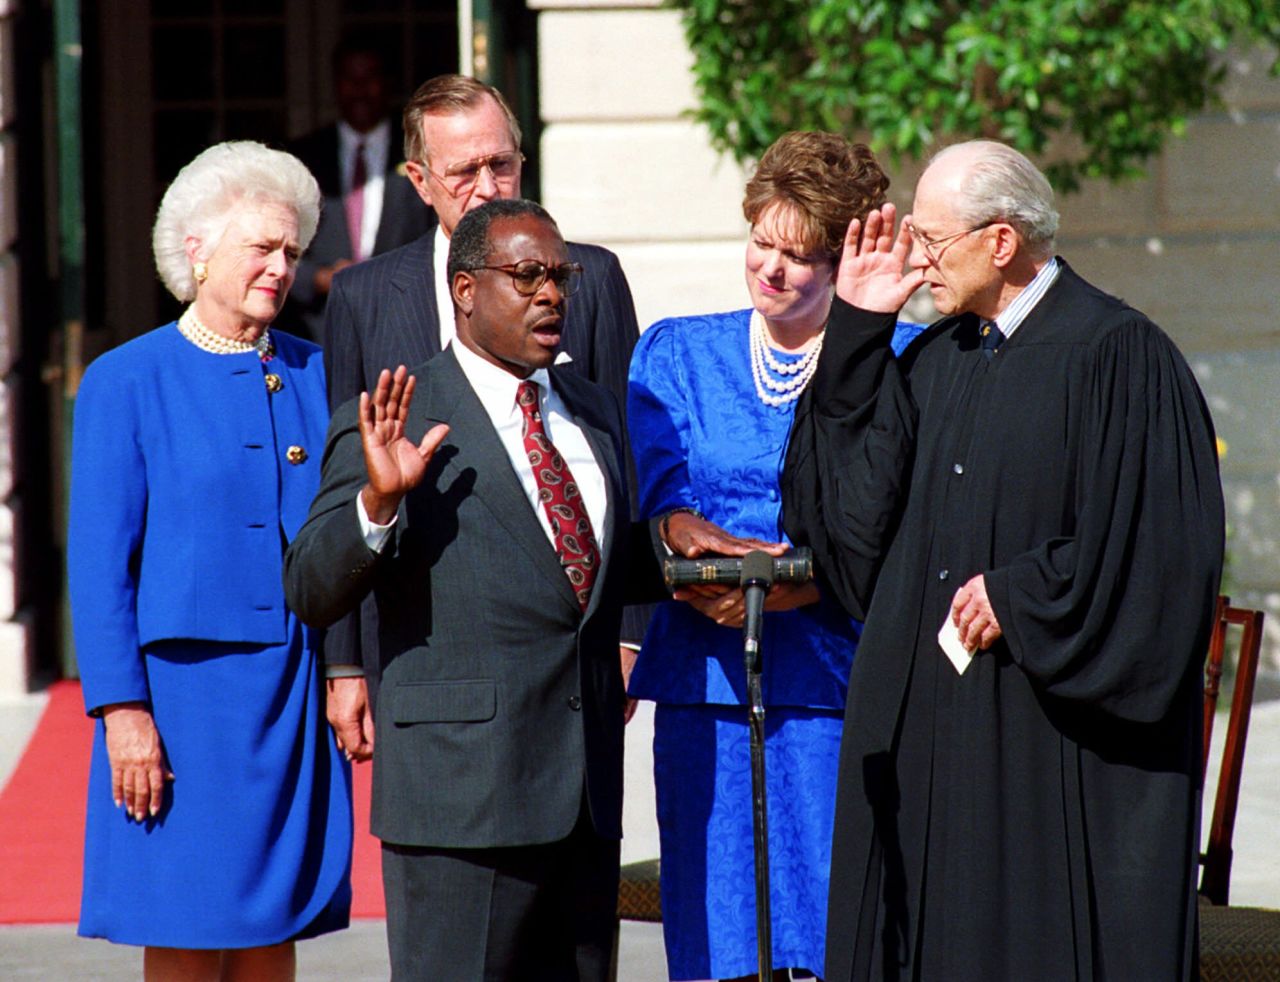 Thomas is sworn in to the Supreme Court by Justice Byron White. Joining him is his wife, the President and first lady Barbara Bush.